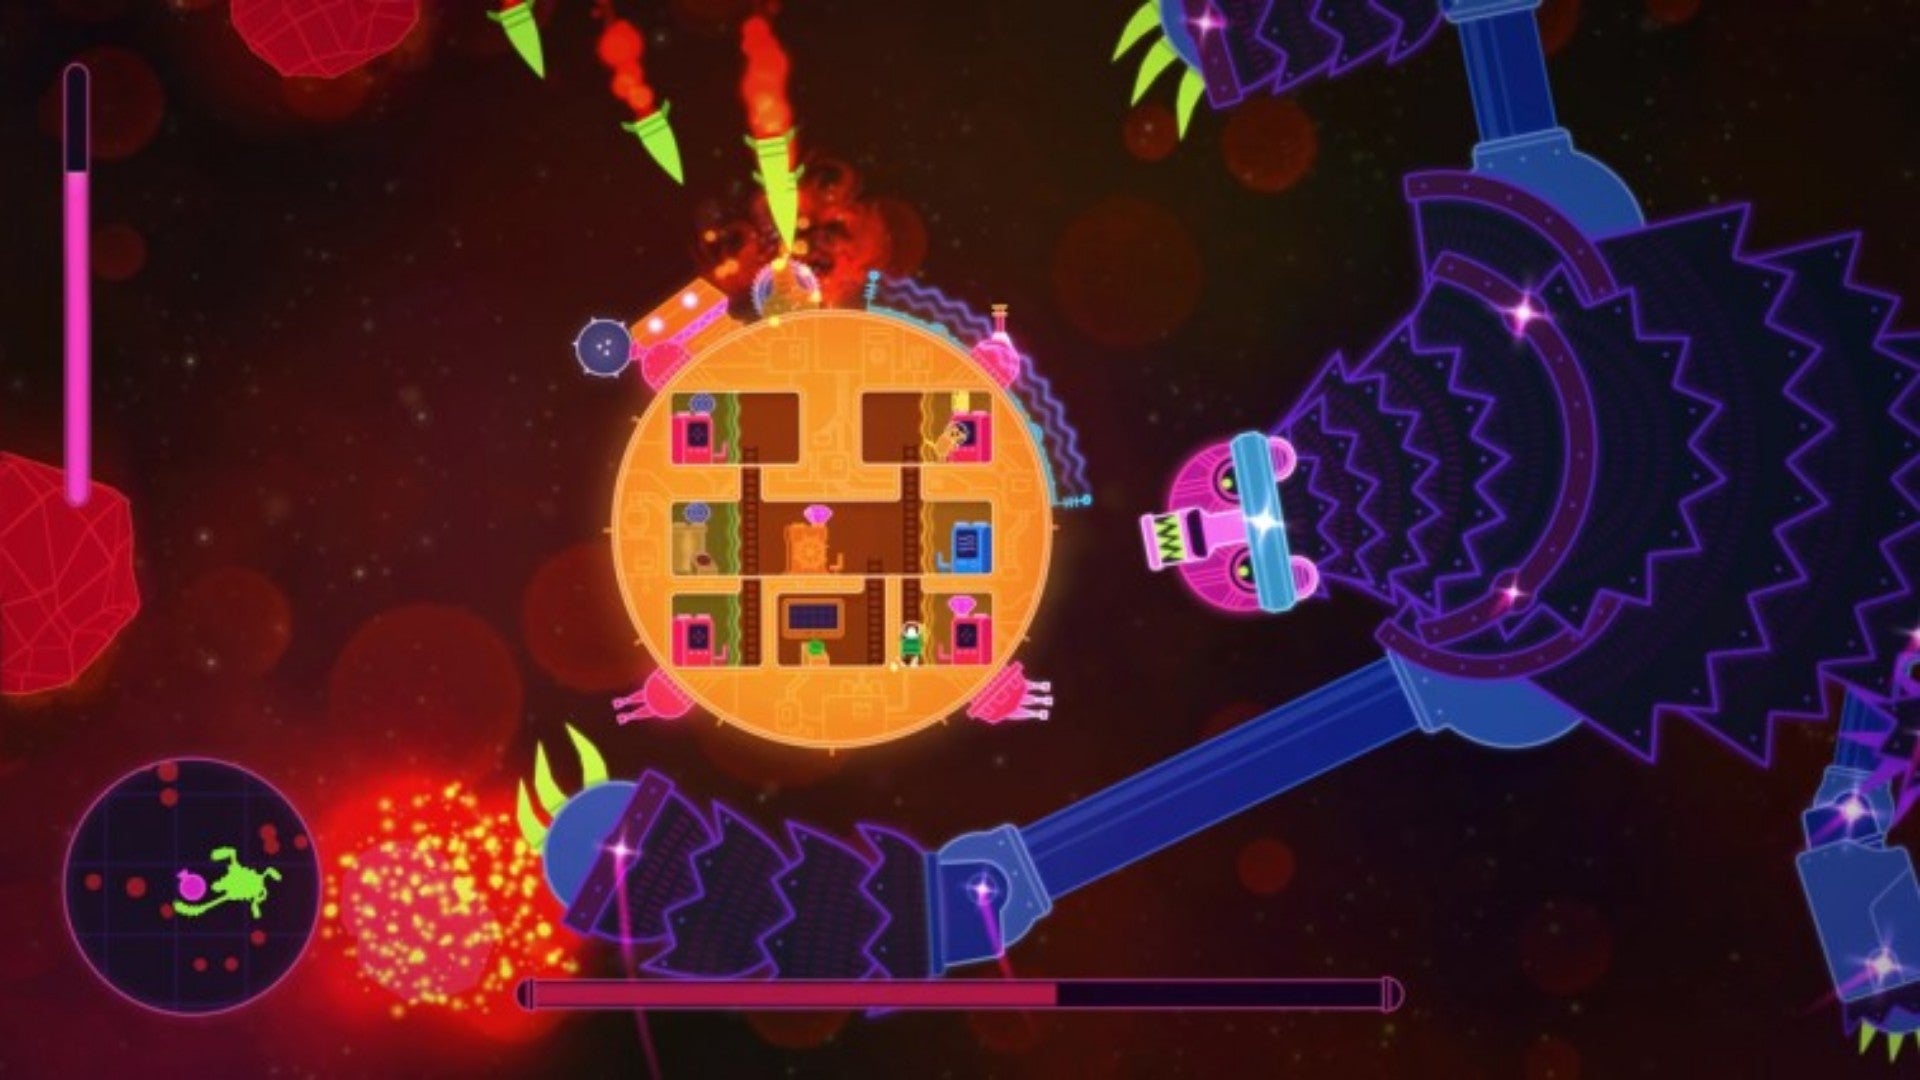 An enemy approaches the spaceship in Lovers in a Dangerous Spacetime